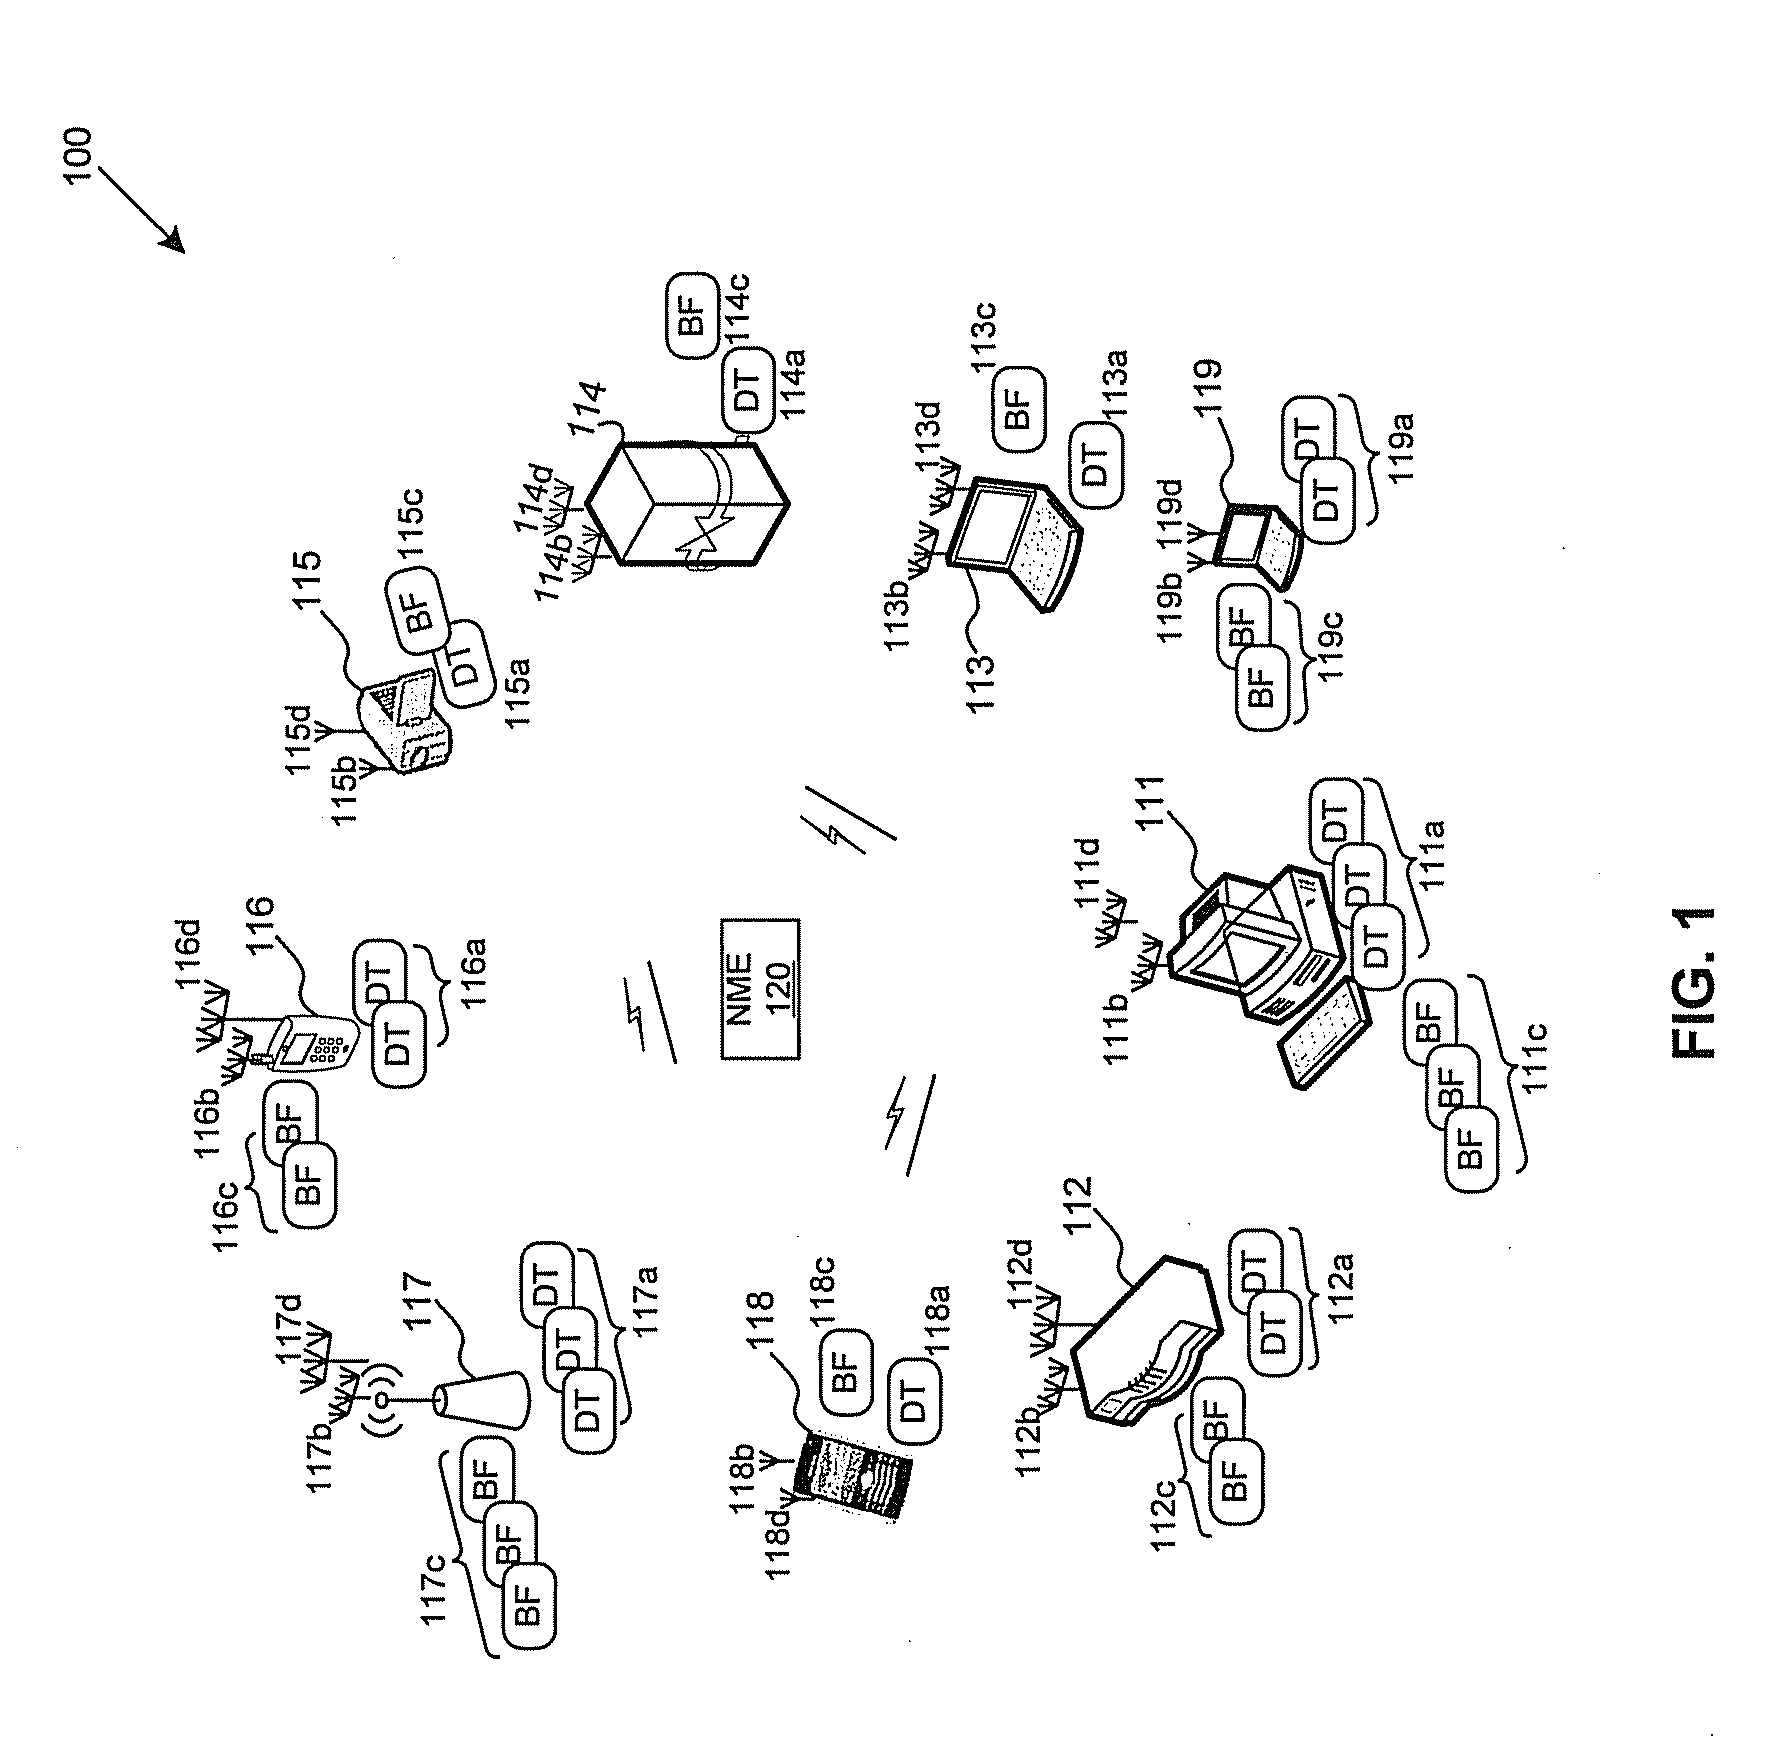 Method and system for high-throughput and low-power communication links in a distributed transceiver network